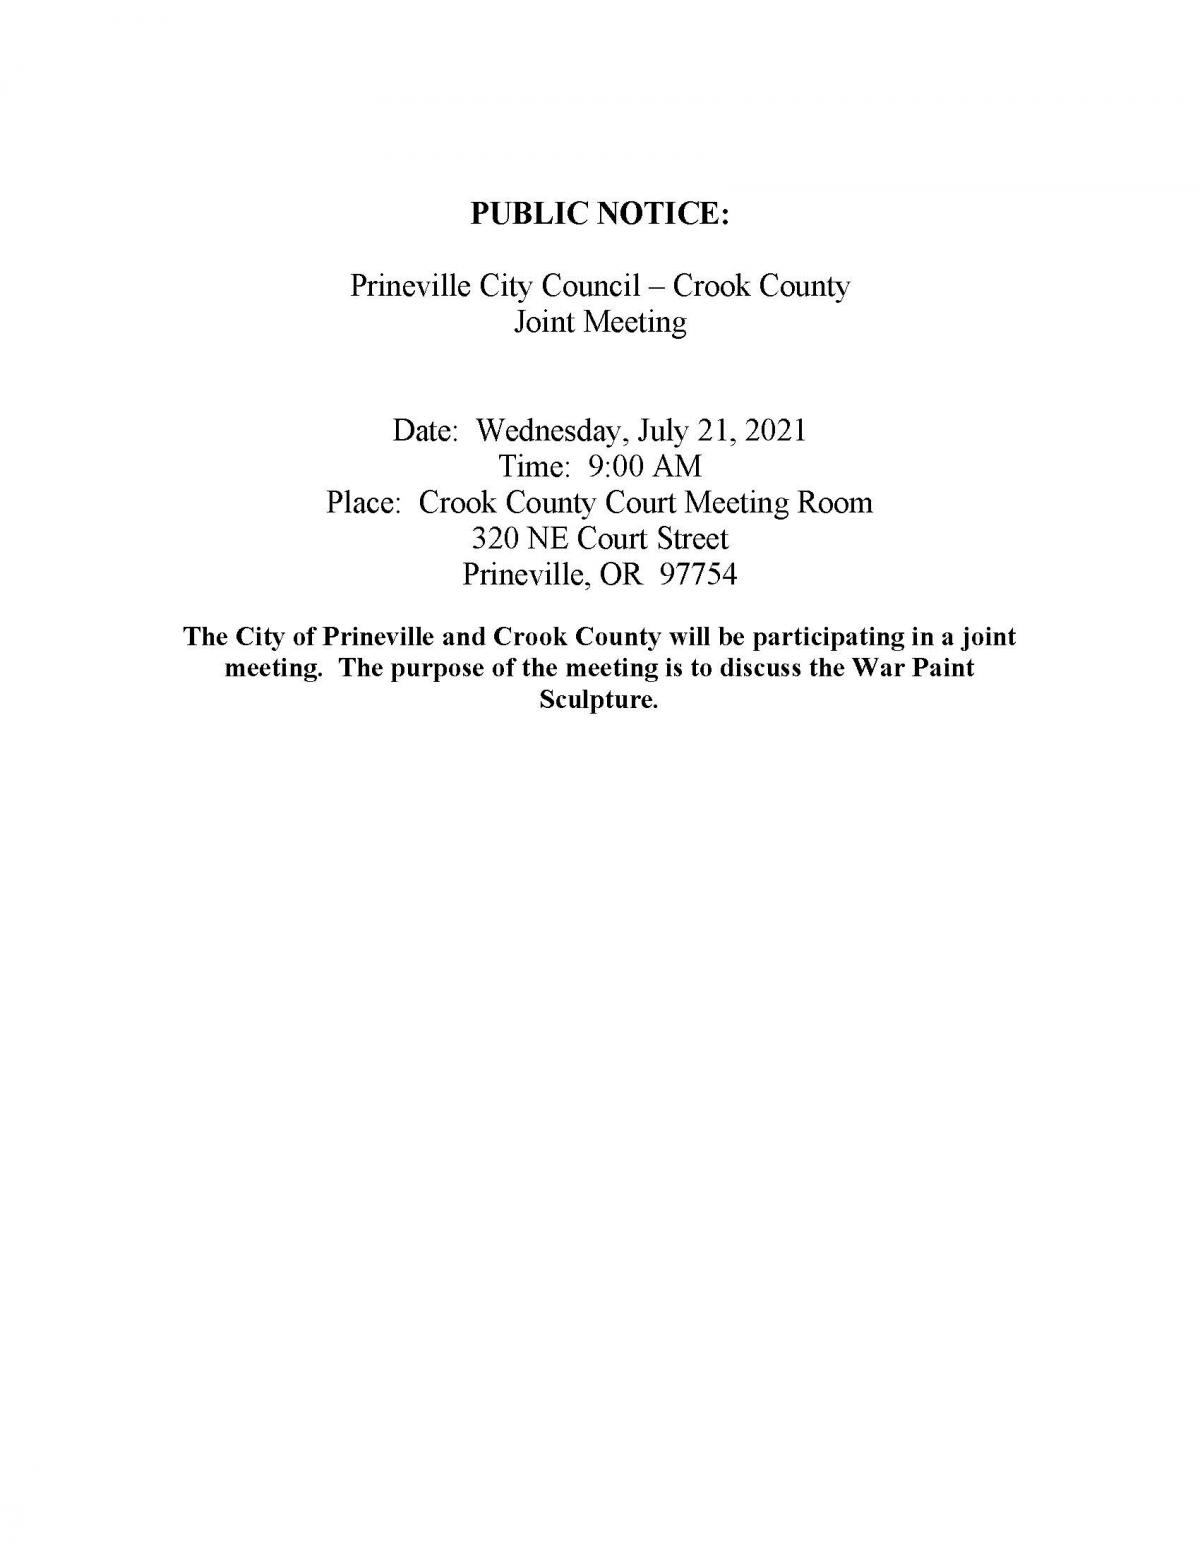 Public Notice - City / County Joint Meeting